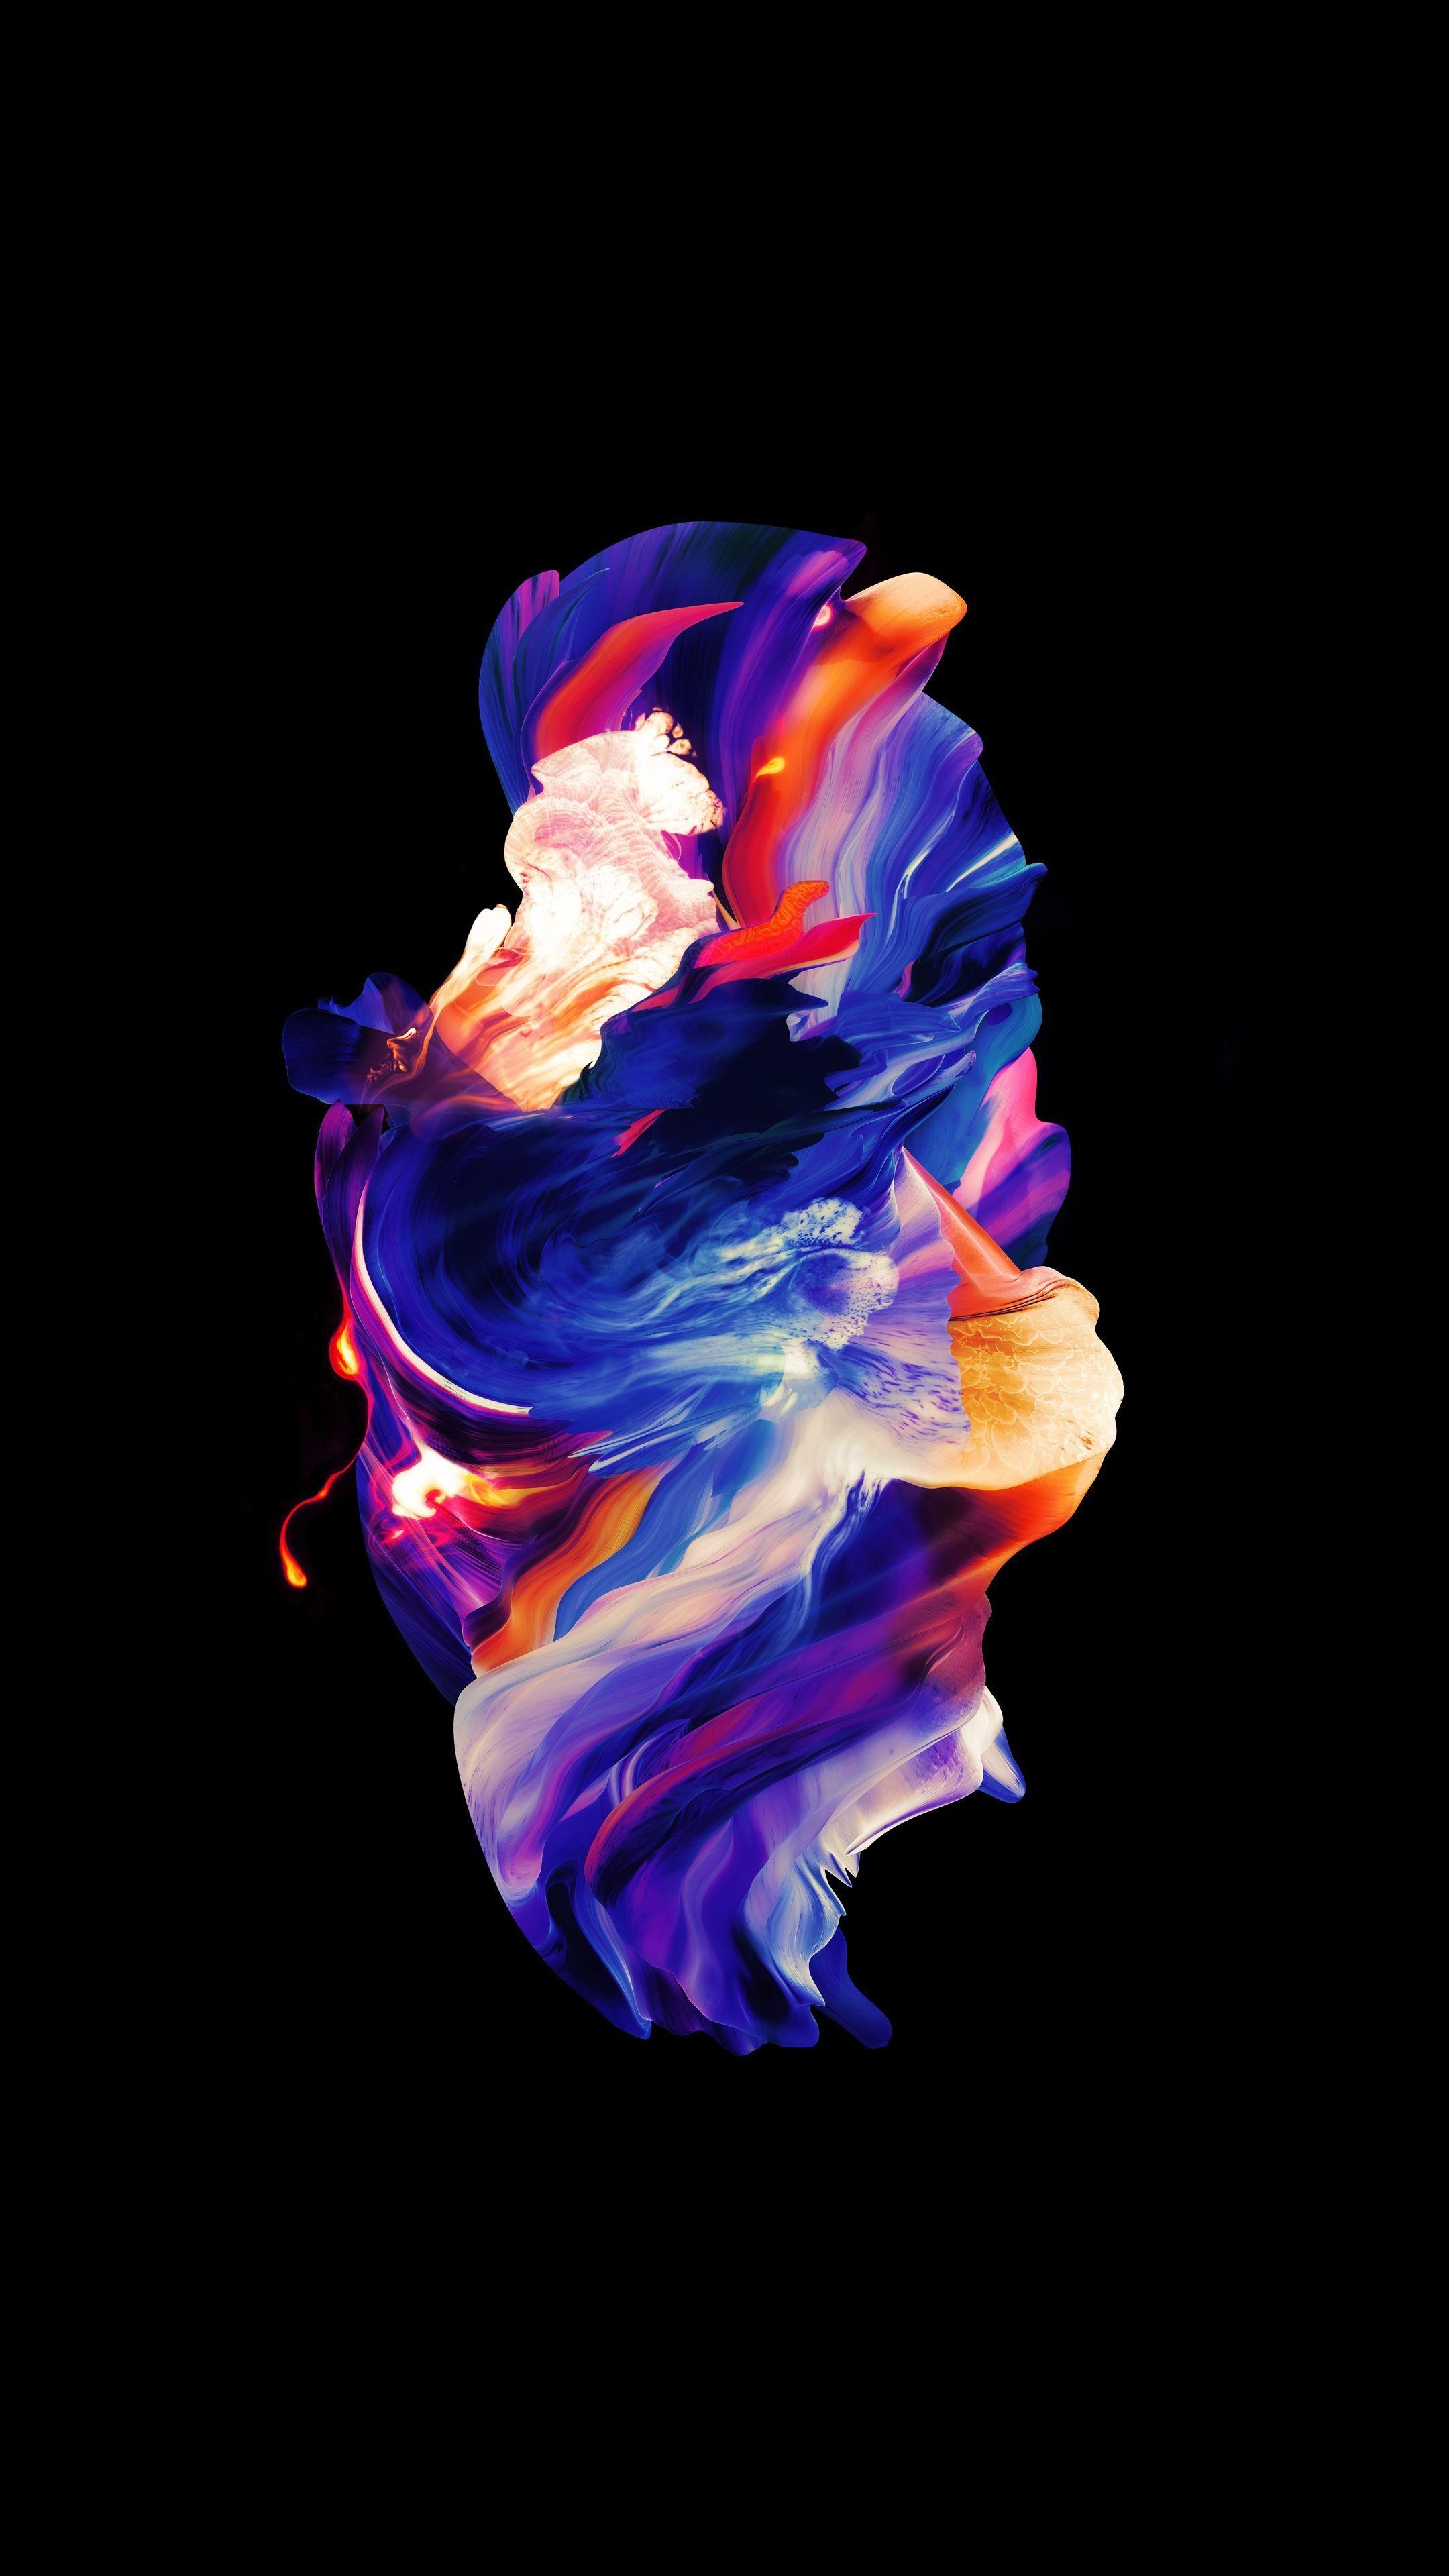 Amoled wallpapers, Stunning displays, Artistic designs, OLED technology, 2160x3840 4K Handy